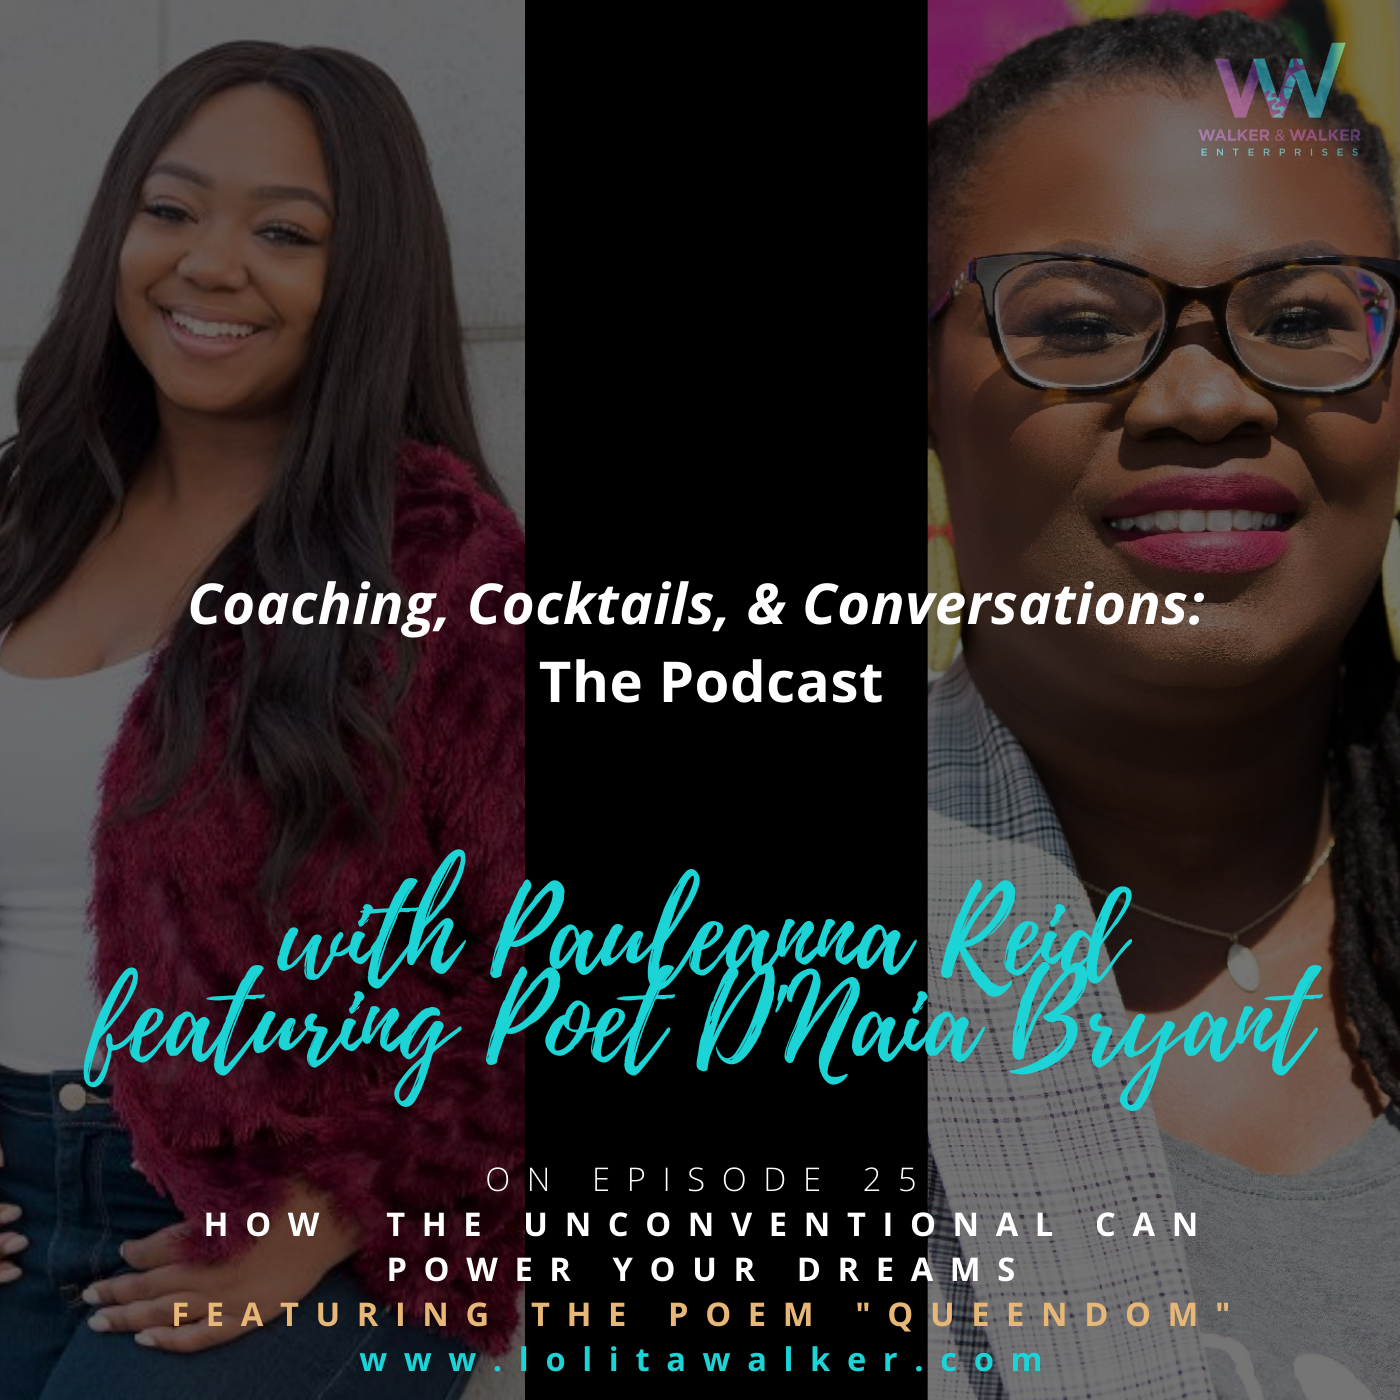 S2E25 - How the Unconventional Can Power Your Dreams (with Pauleanna Reid & Poet, D&#39;Naia Bryant))